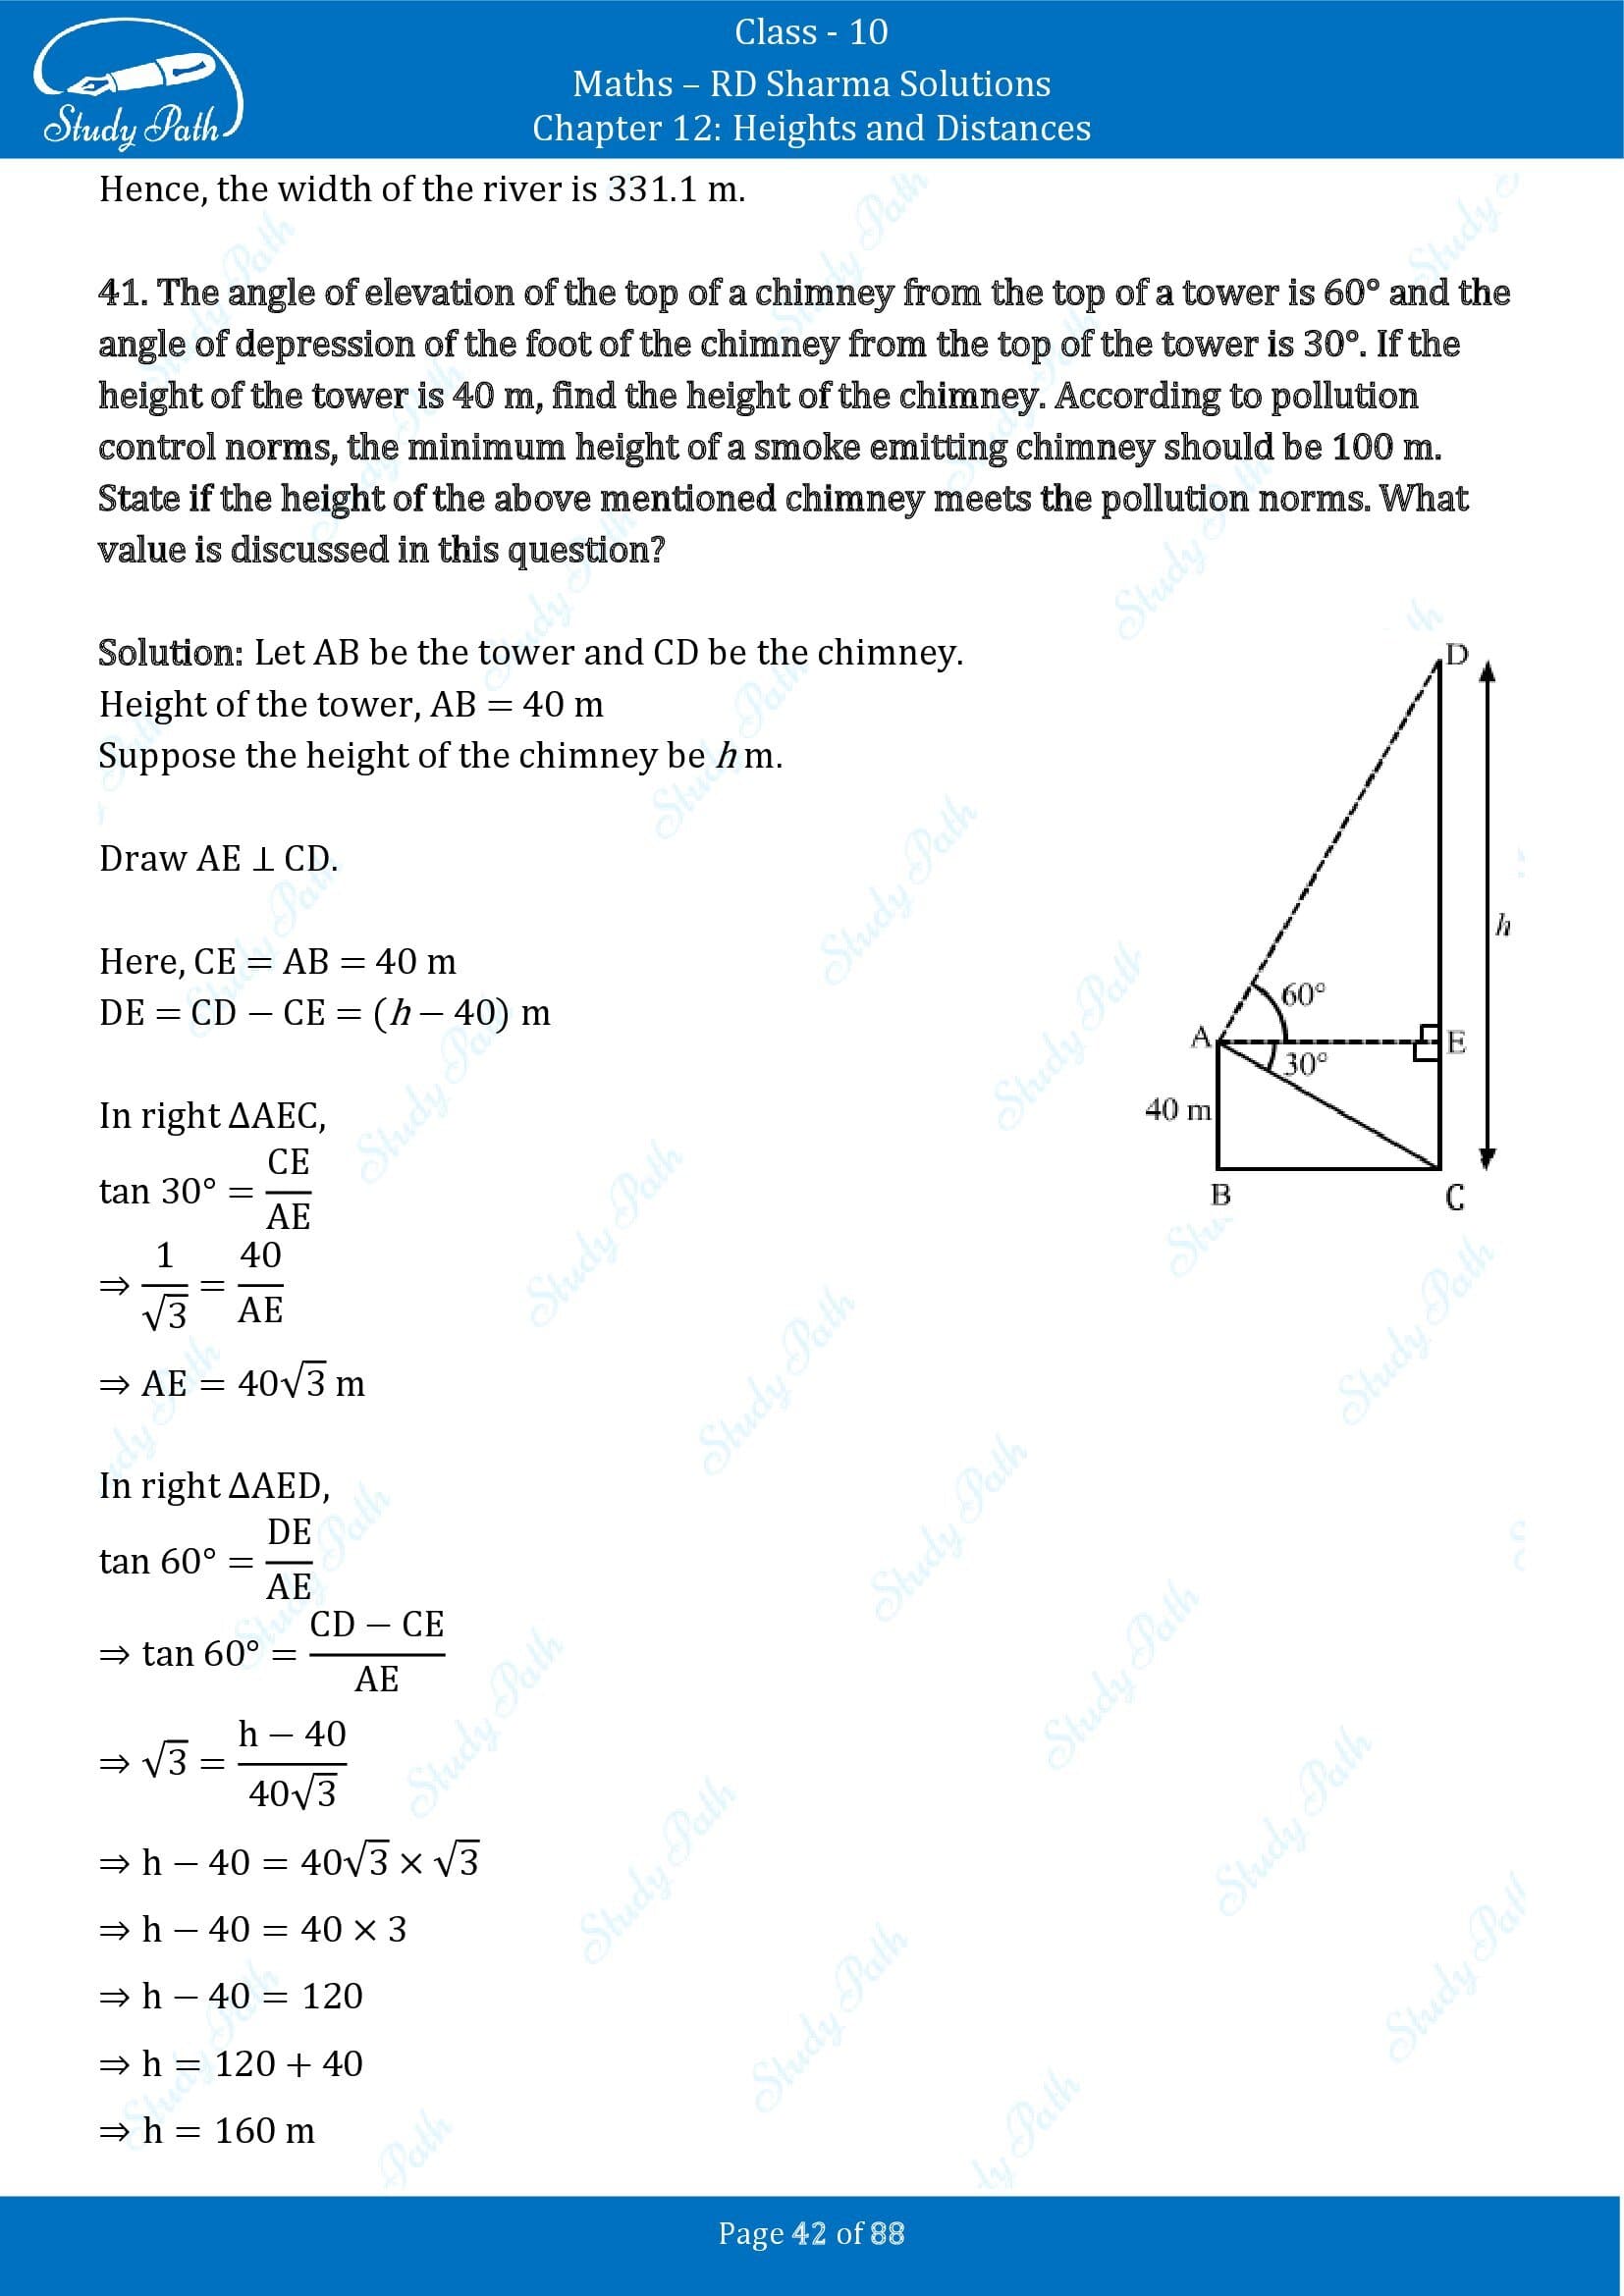 RD Sharma Solutions Class 10 Chapter 12 Heights and Distances Exercise 12.1 00042